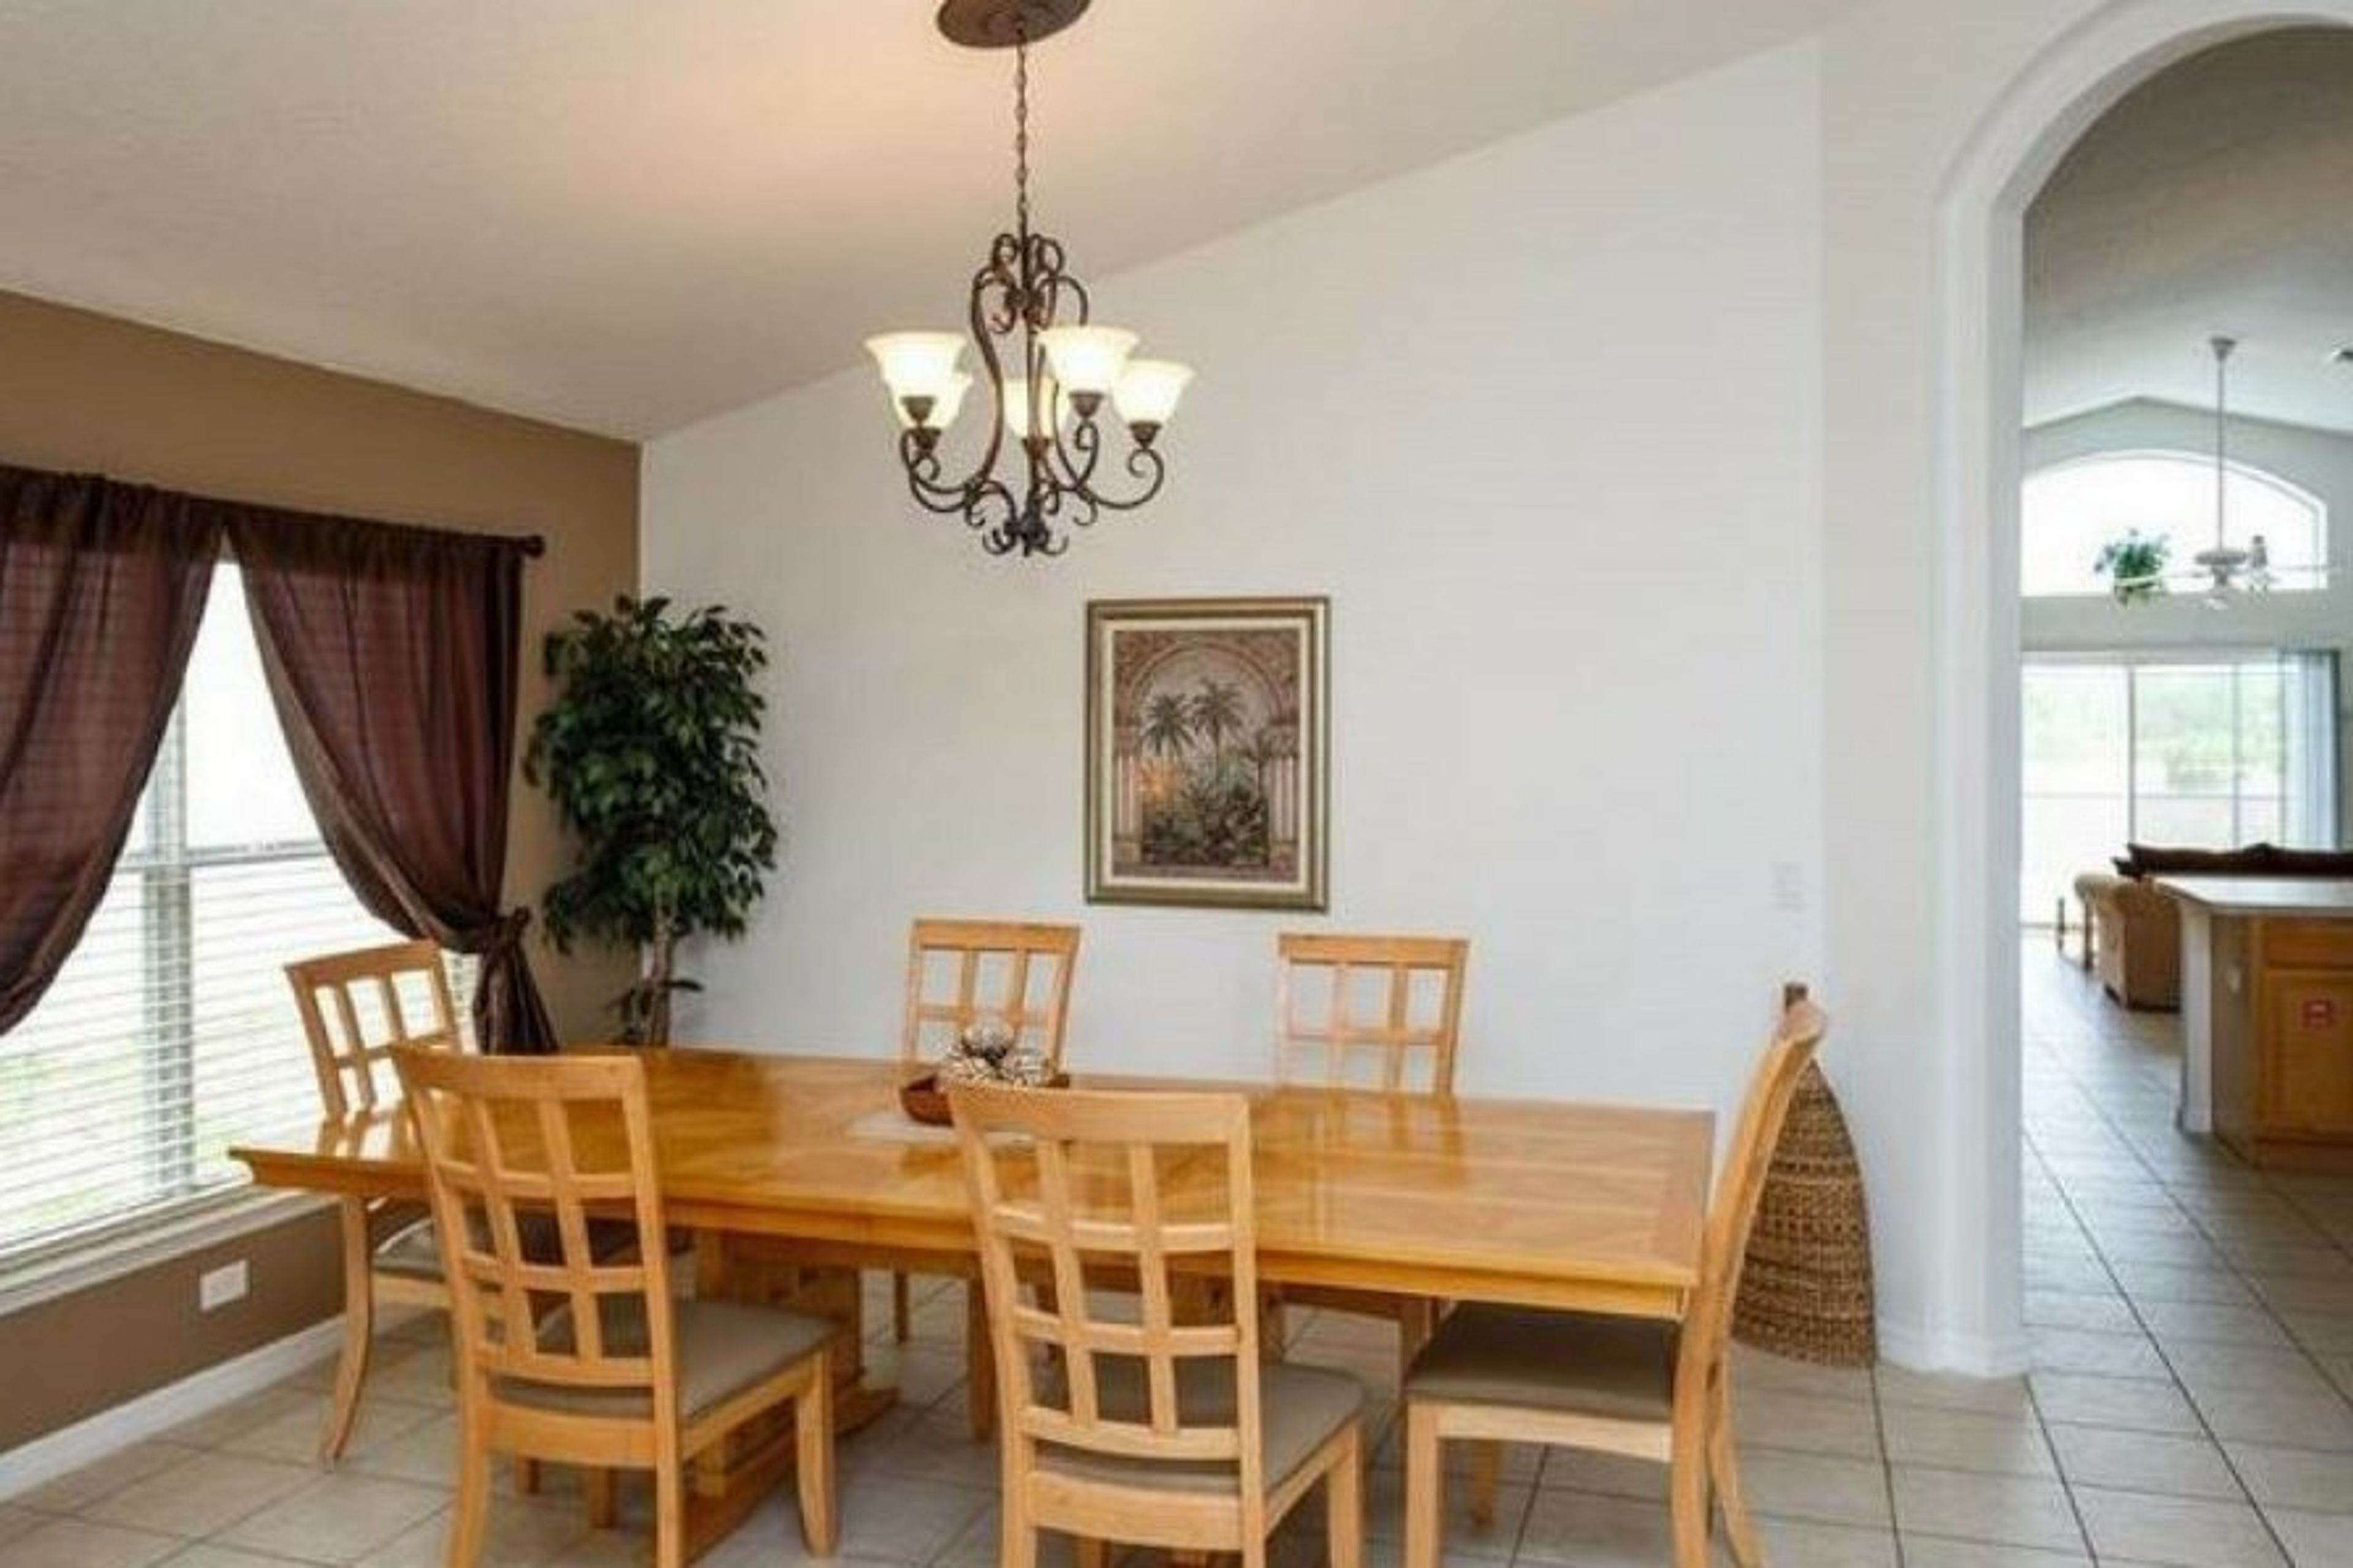 Enjoy family dinner's in the spacious Dining Room.